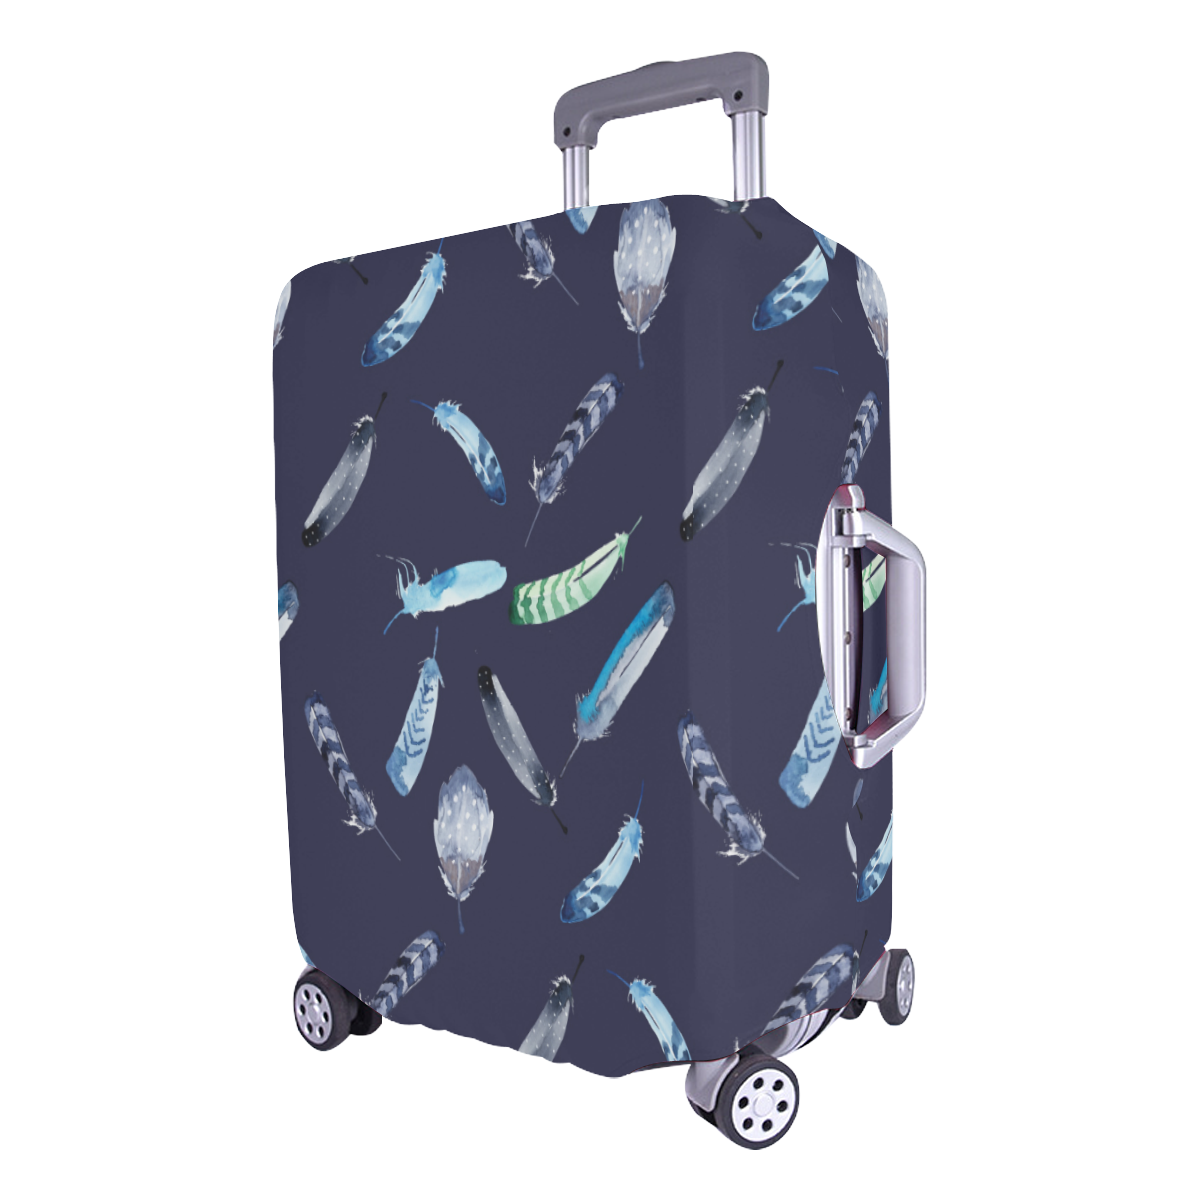 Feather dark blue Luggage Cover/Large 26"-28"